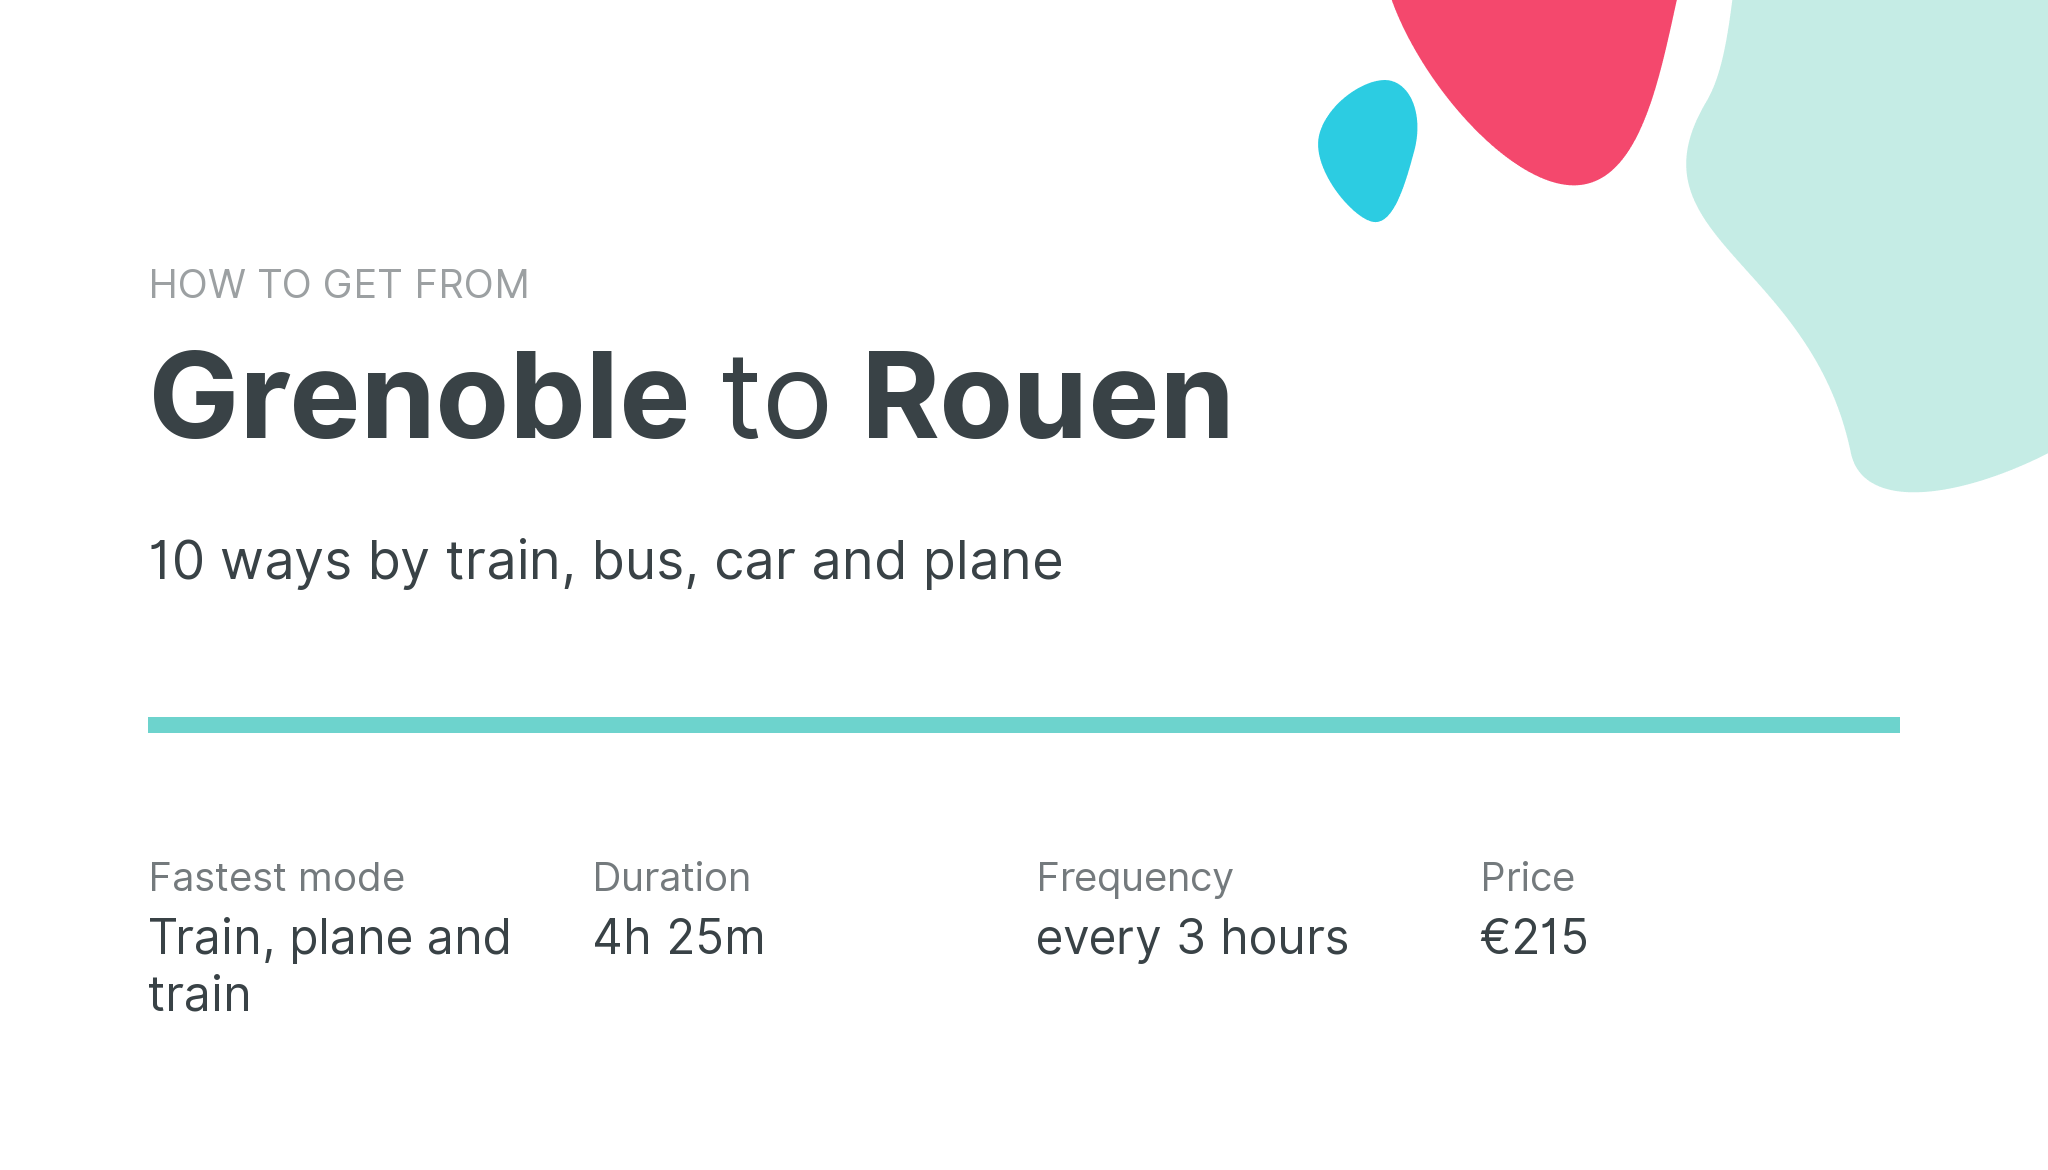 How do I get from Grenoble to Rouen